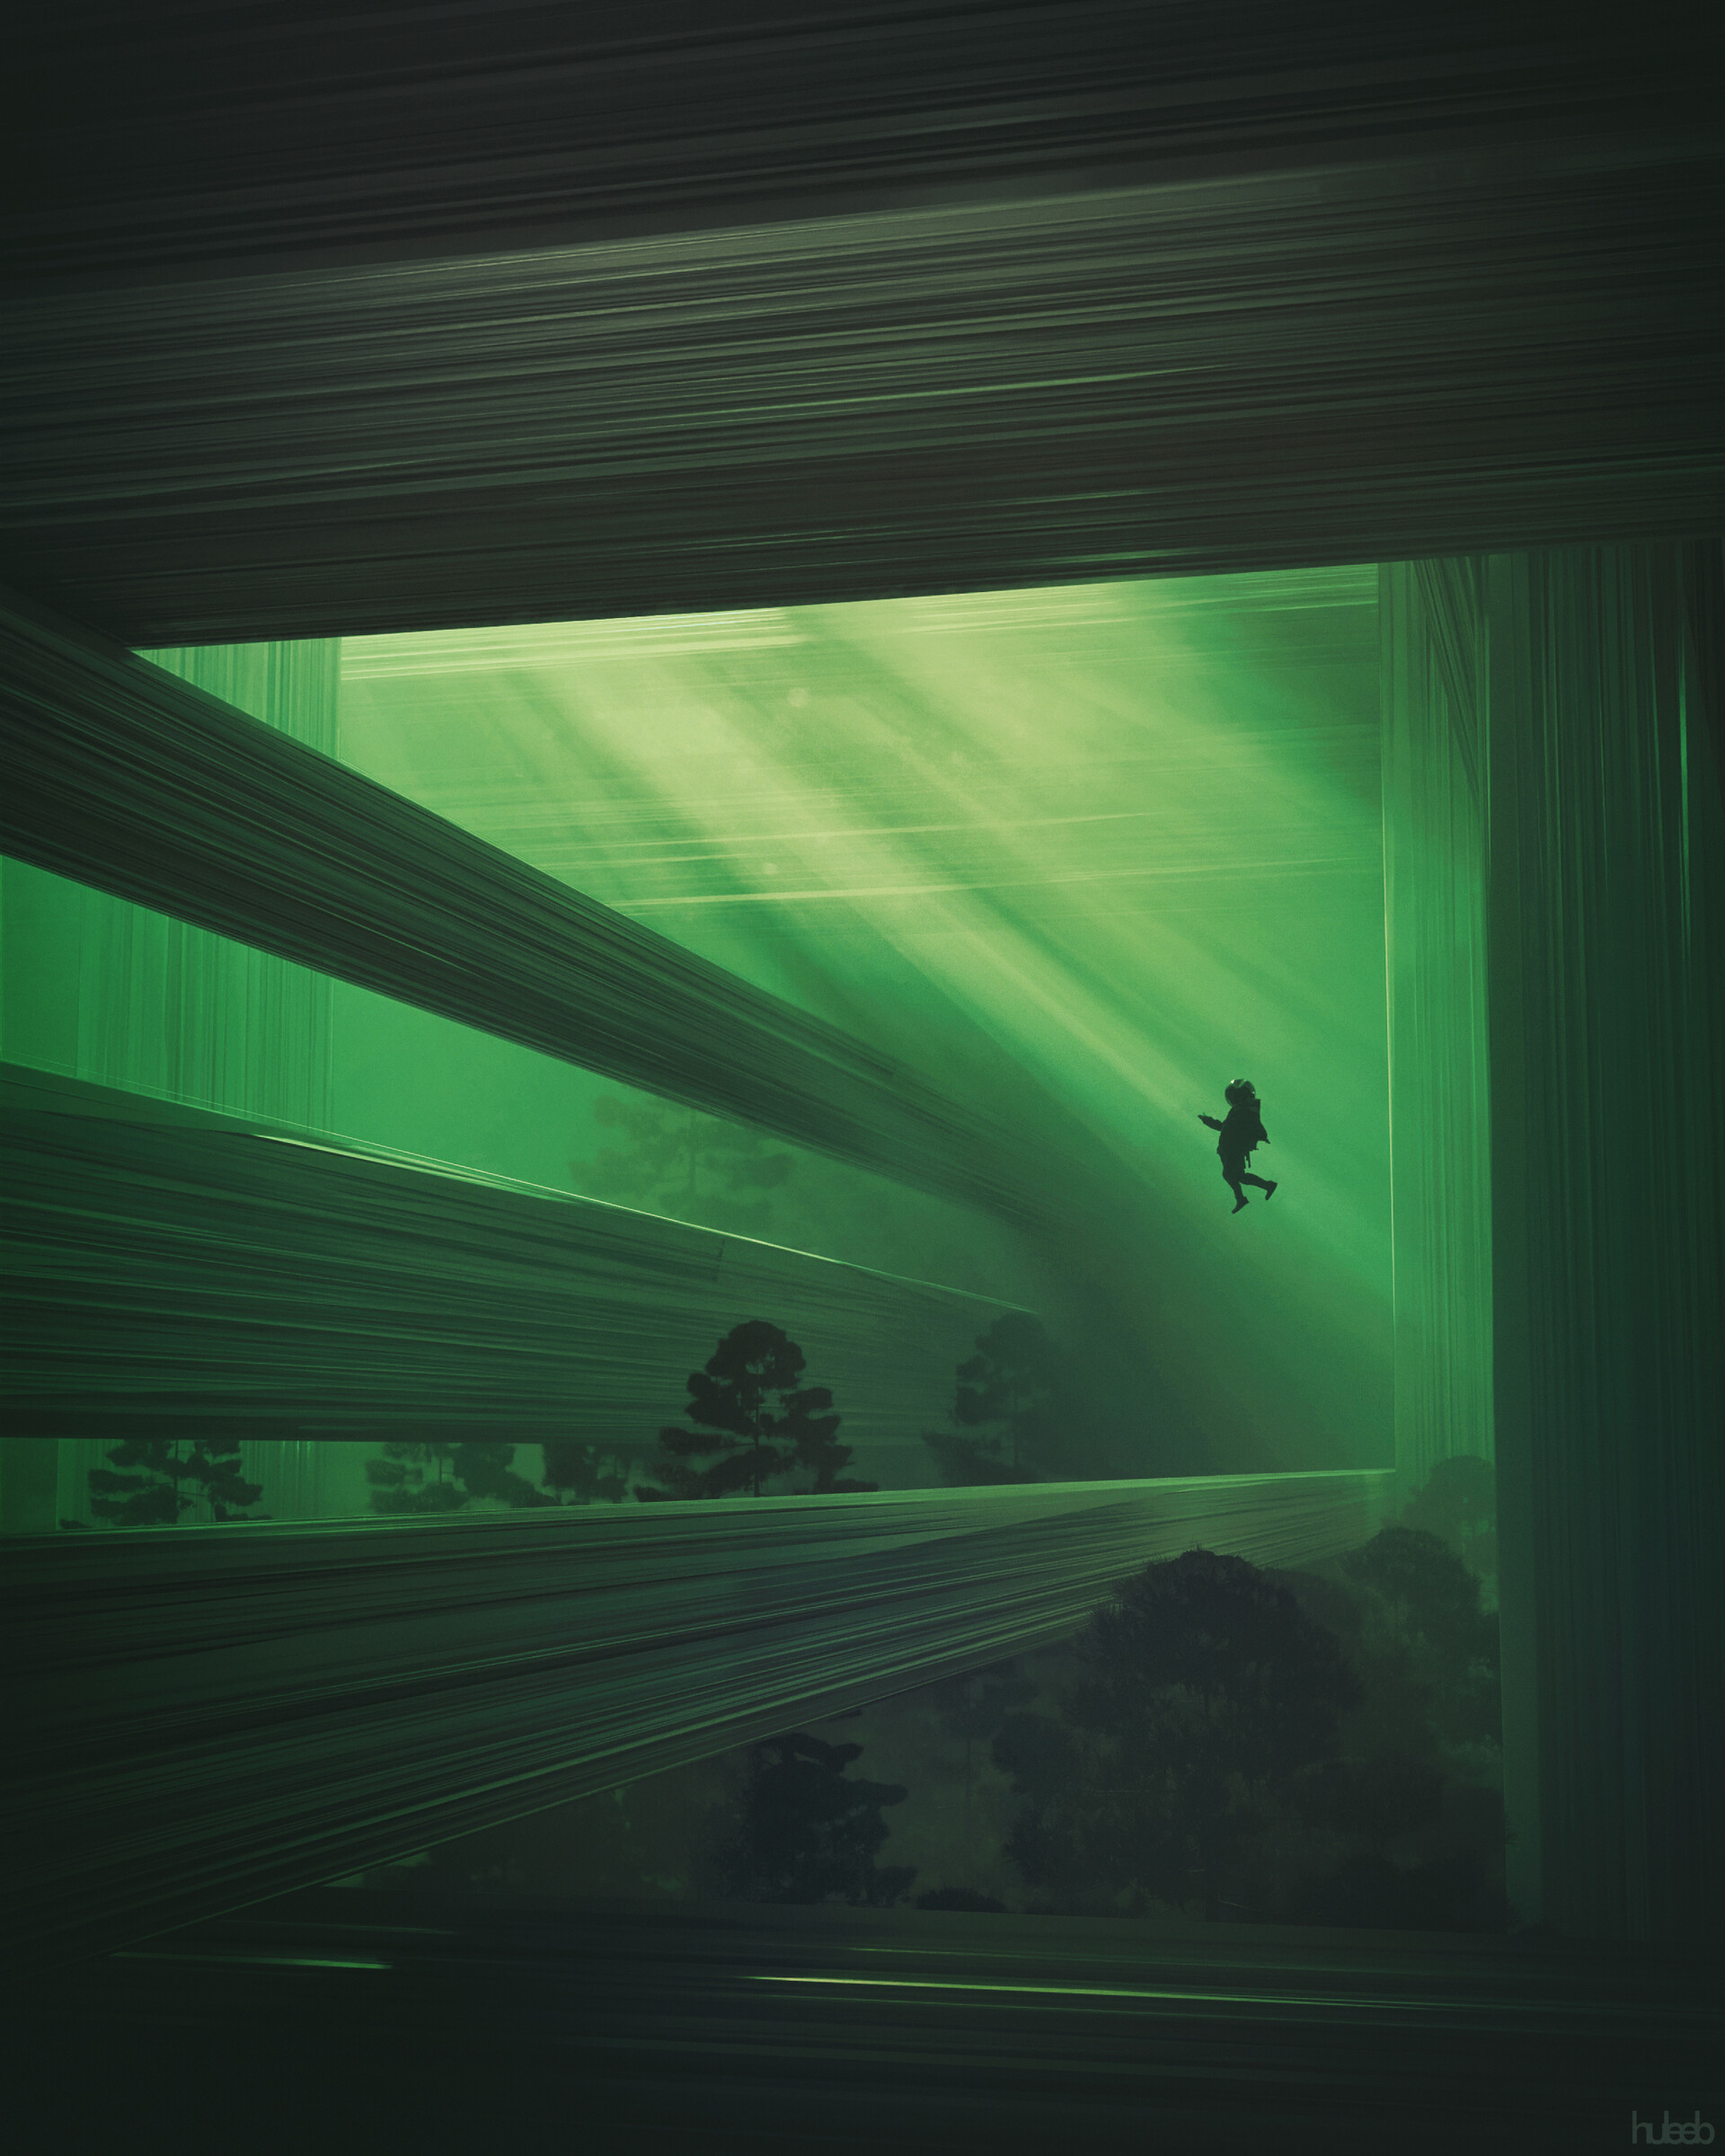 space suit, art, trees, fantasy, beams, rays, human, person, loneliness, spacesuit